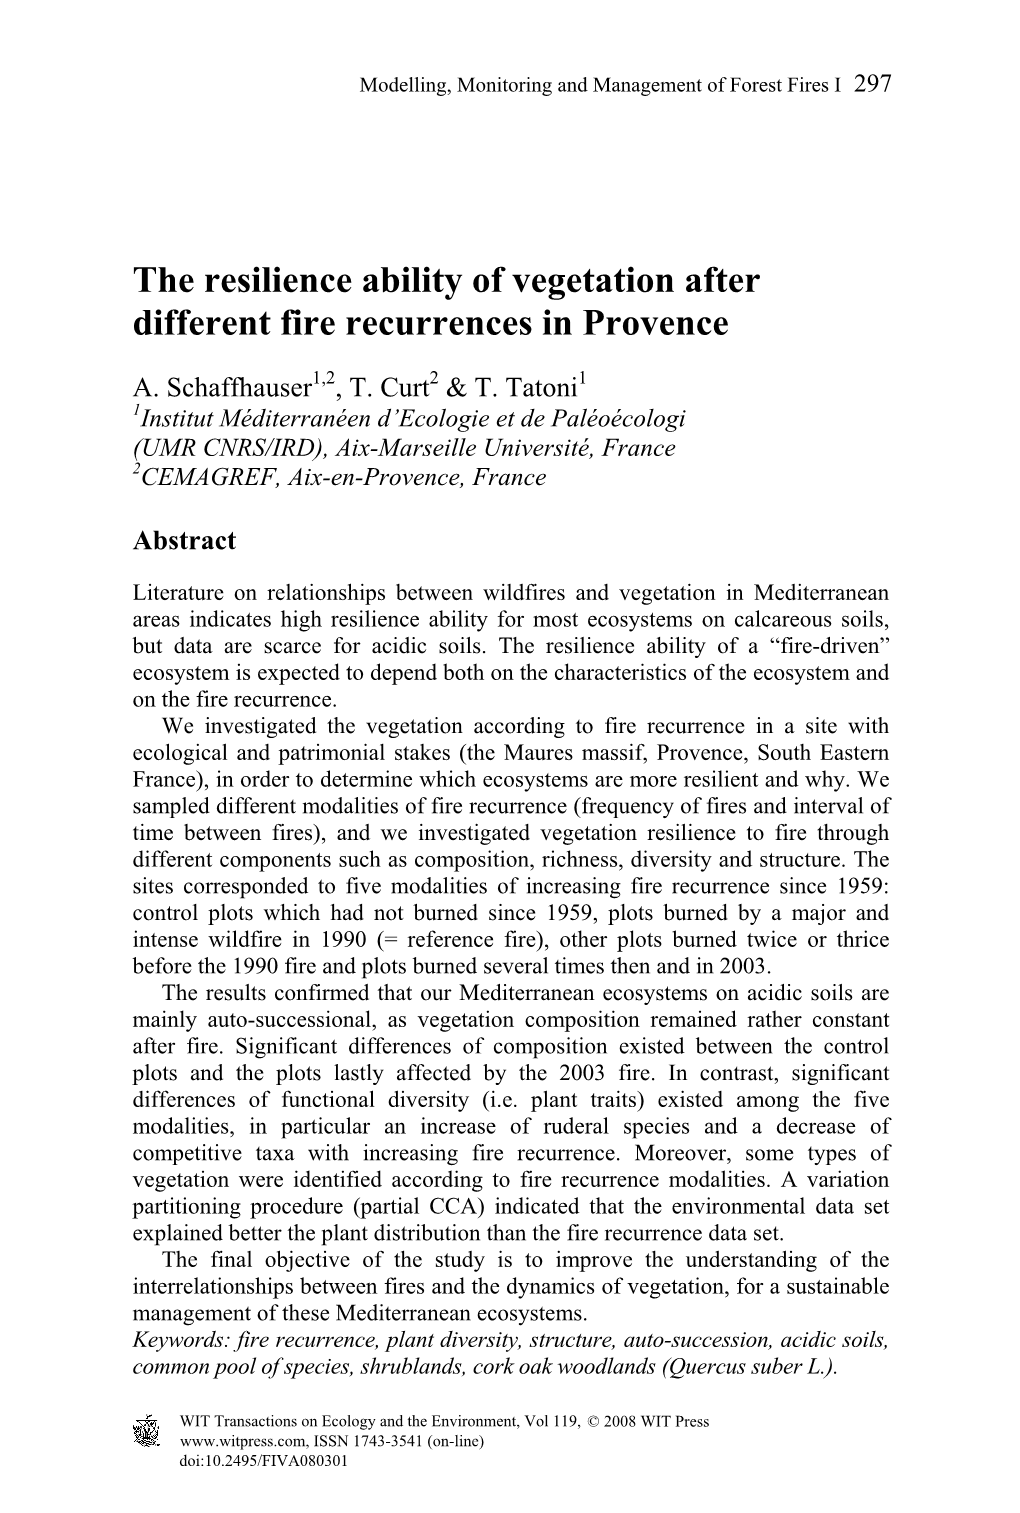 The Resilience Ability of Vegetation After Different Fire Recurrences in Provence